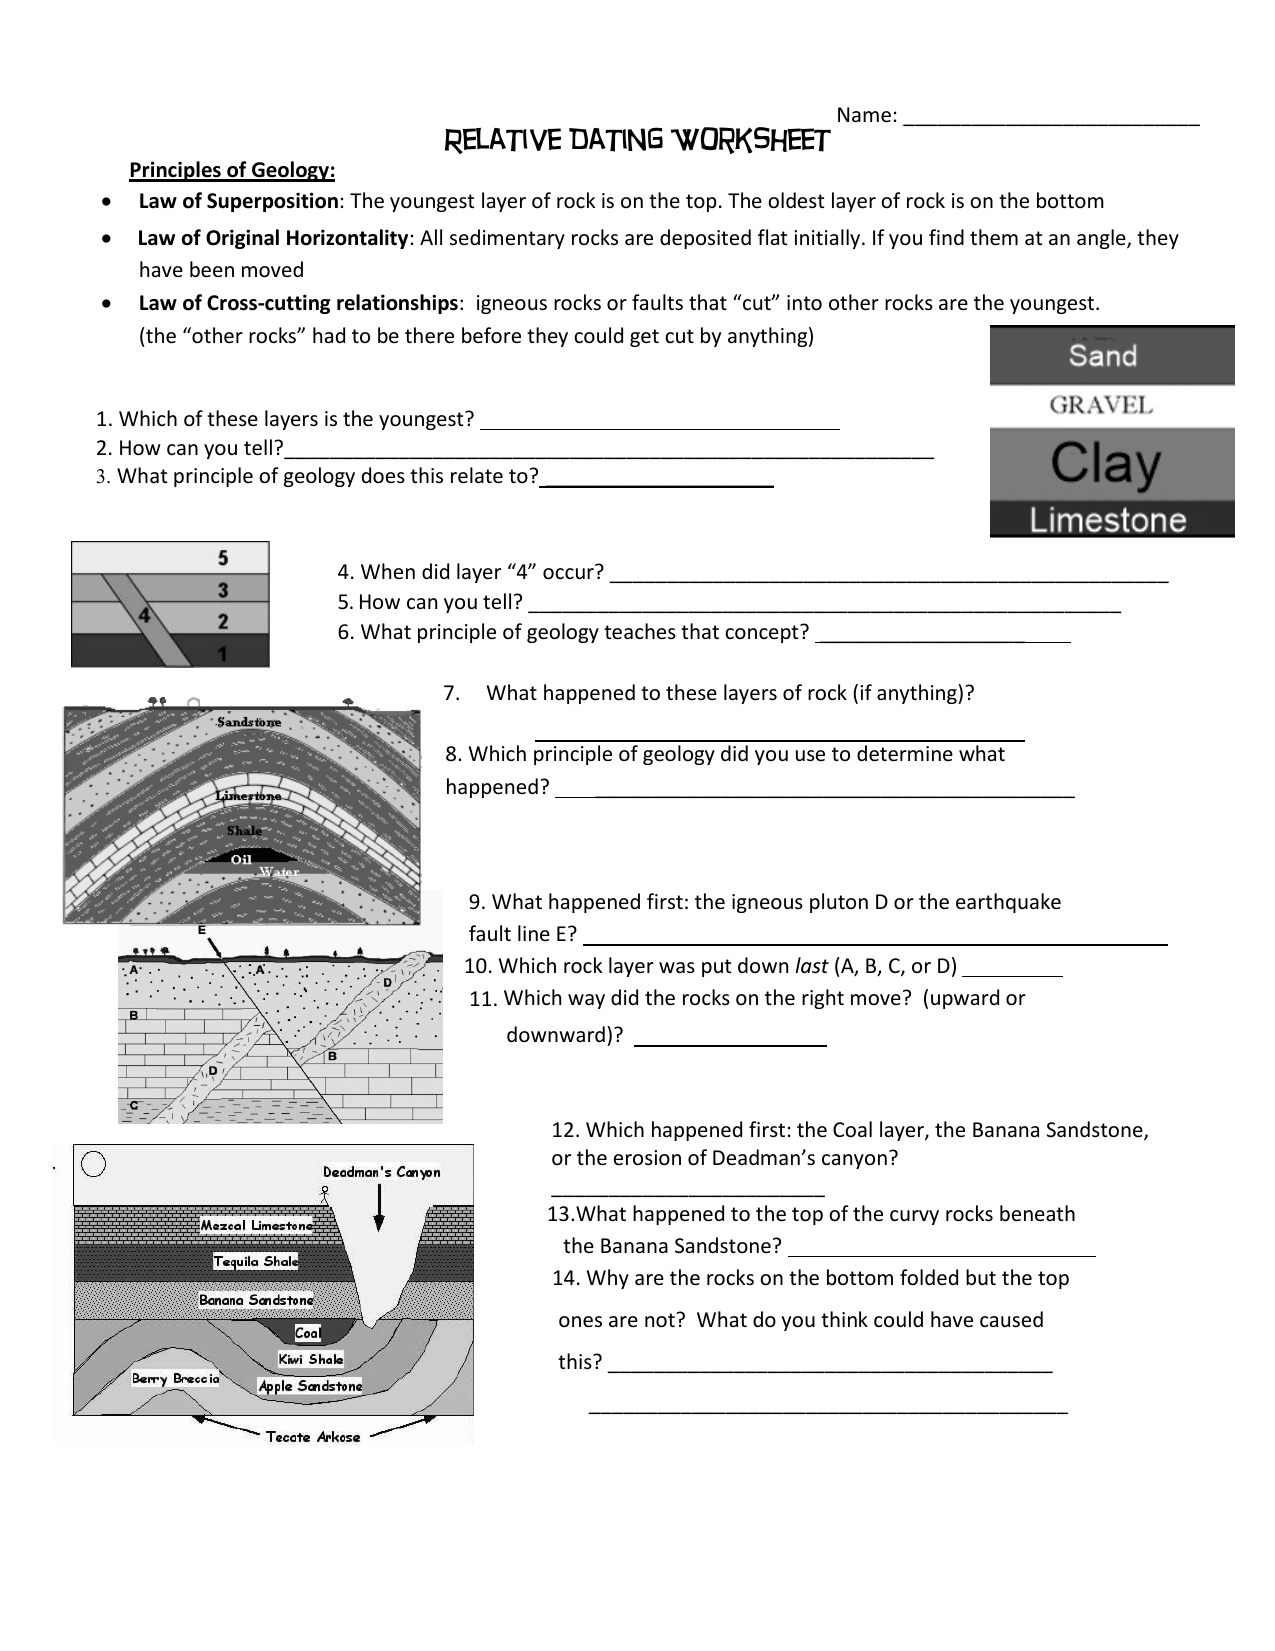 Of geology principles relative answers worksheet dating Name: RELATIVE